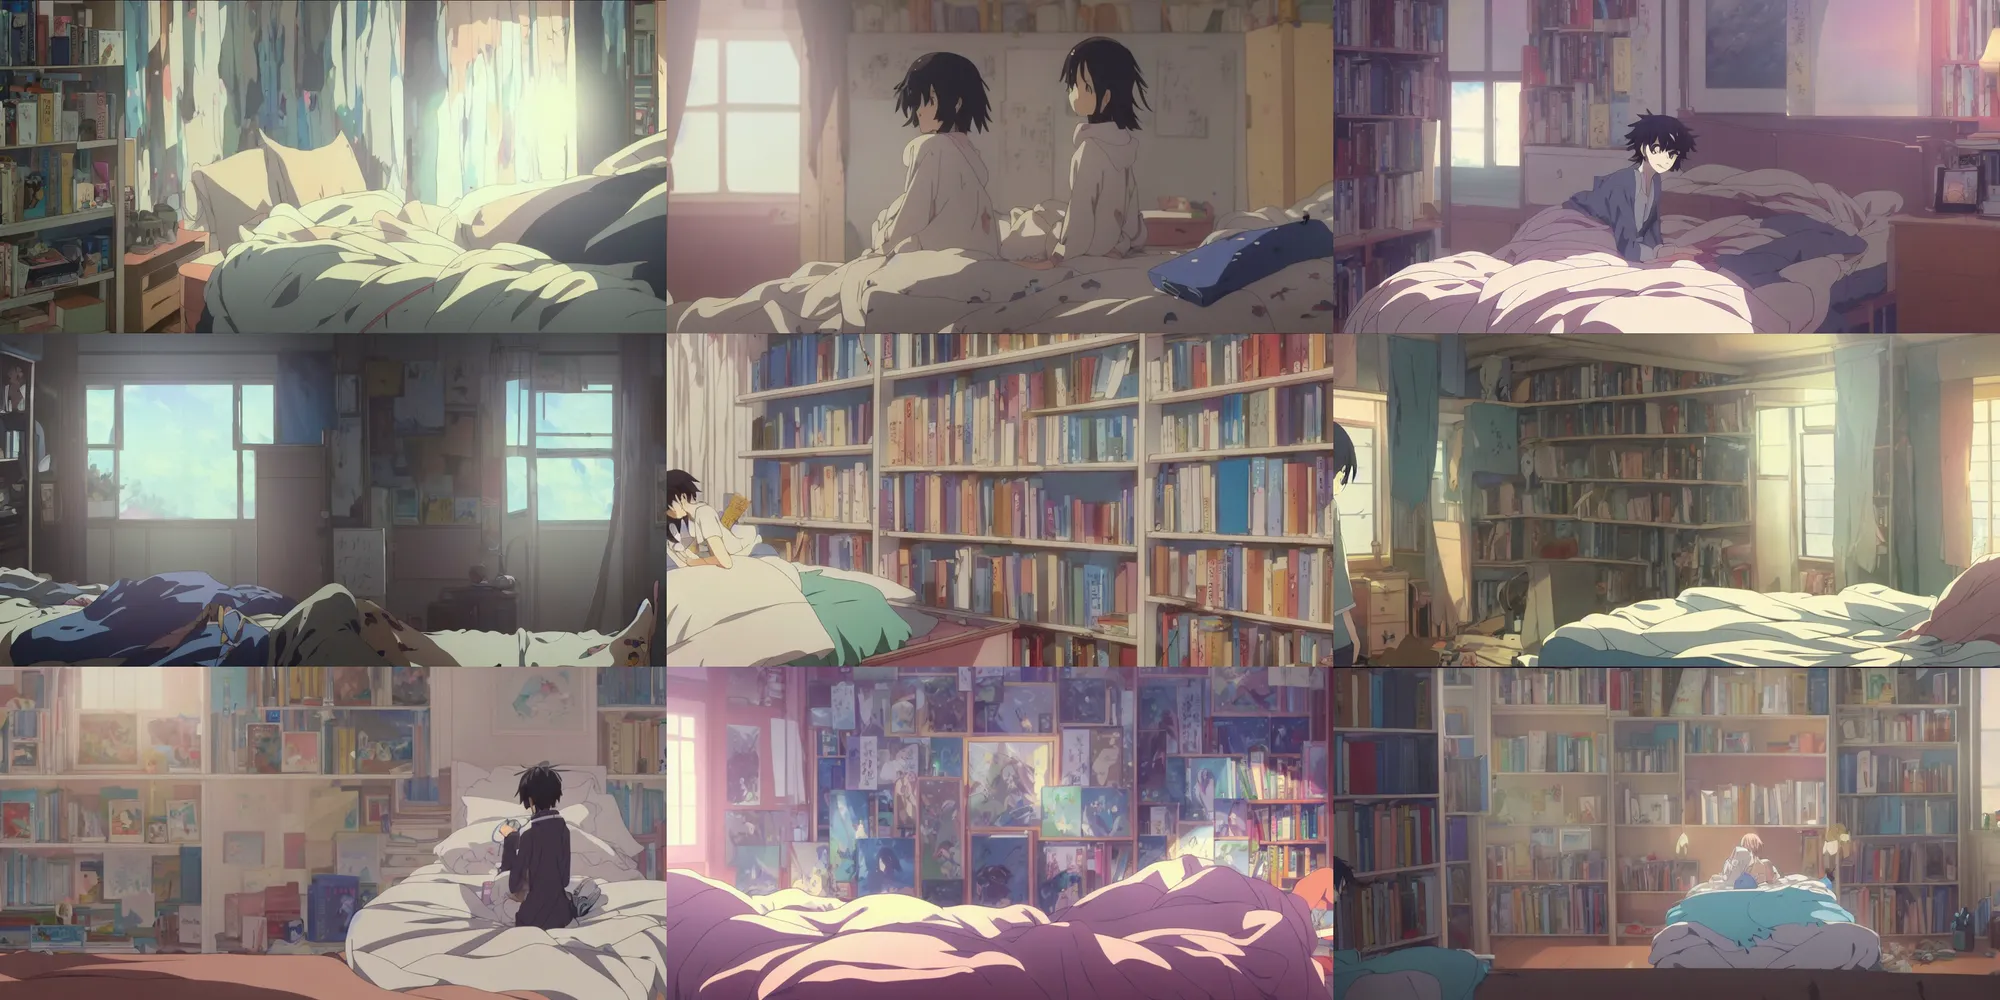 Prompt: an intimate close up of the shelf in the anime character's bedroom, painting of the main character's bedroom in the anime film by makoto shinkai, technology, books, messy clothes, anime lover, screenshot from the makoto shinkai anime